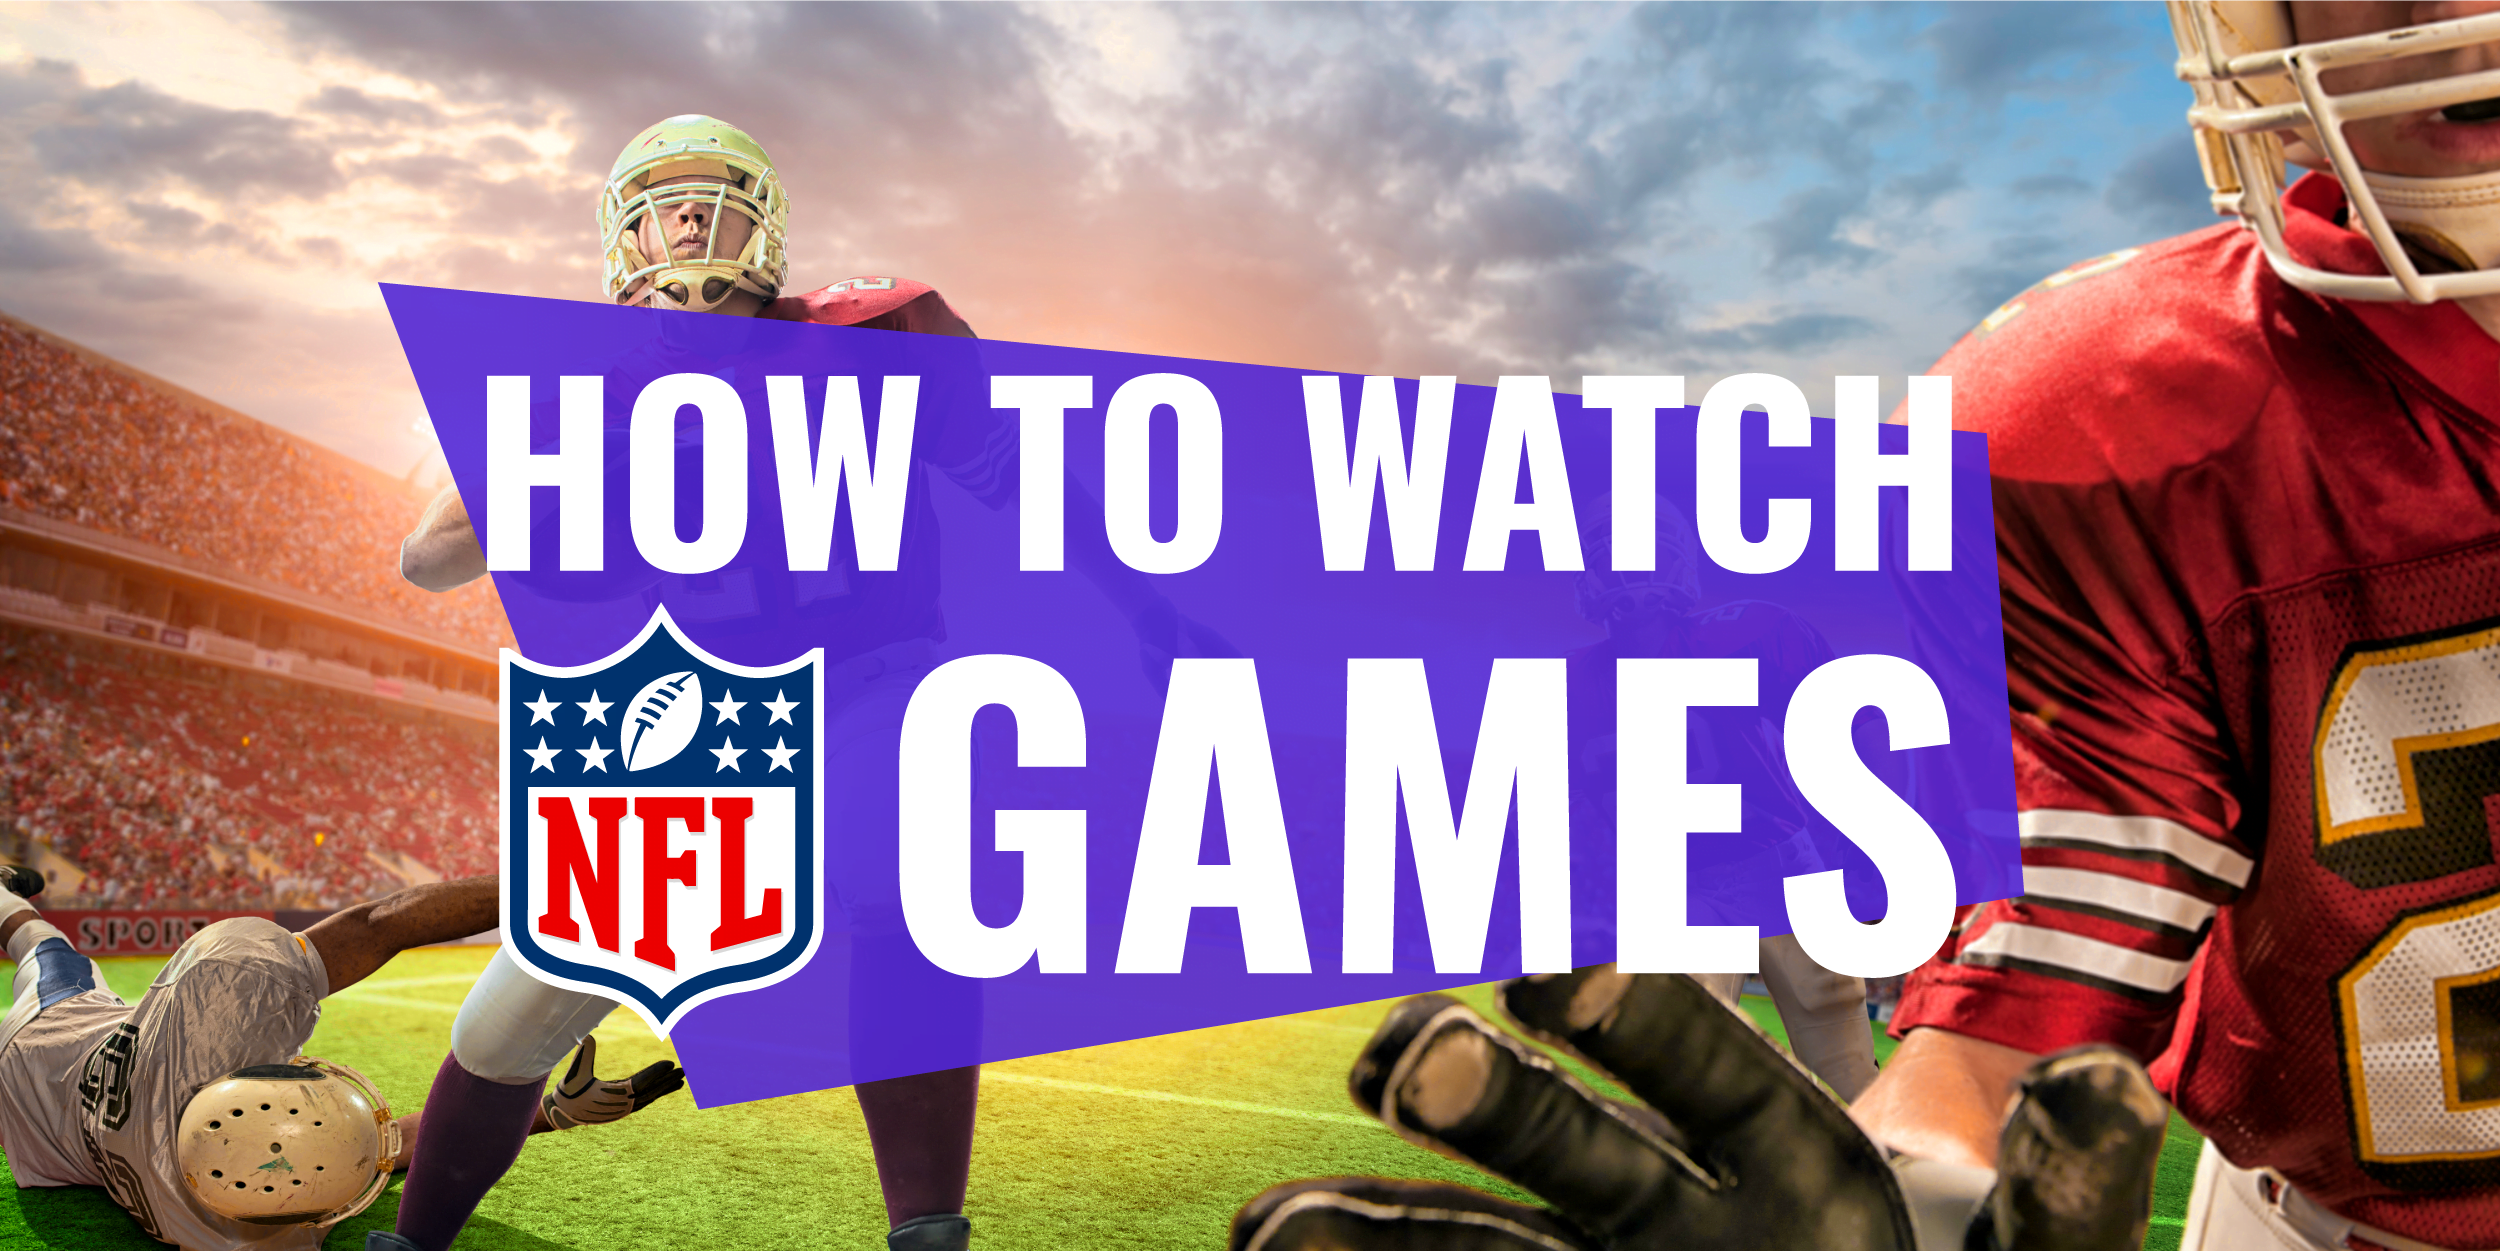 Vipleague Tennis And Nfl And More! Watch Now!